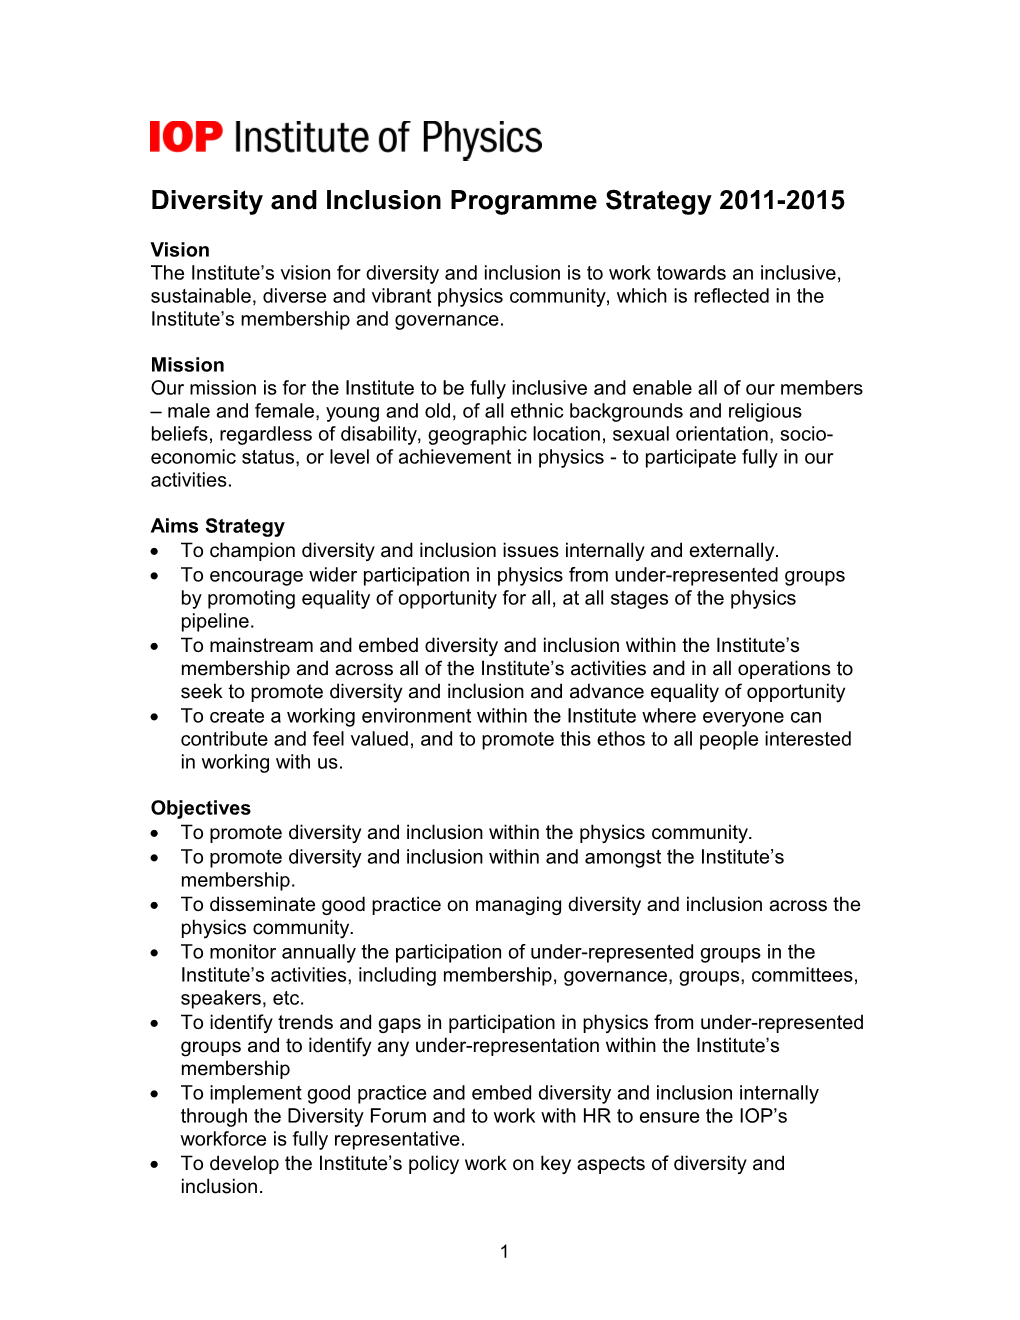 The Institute of Physics Diversity Programme